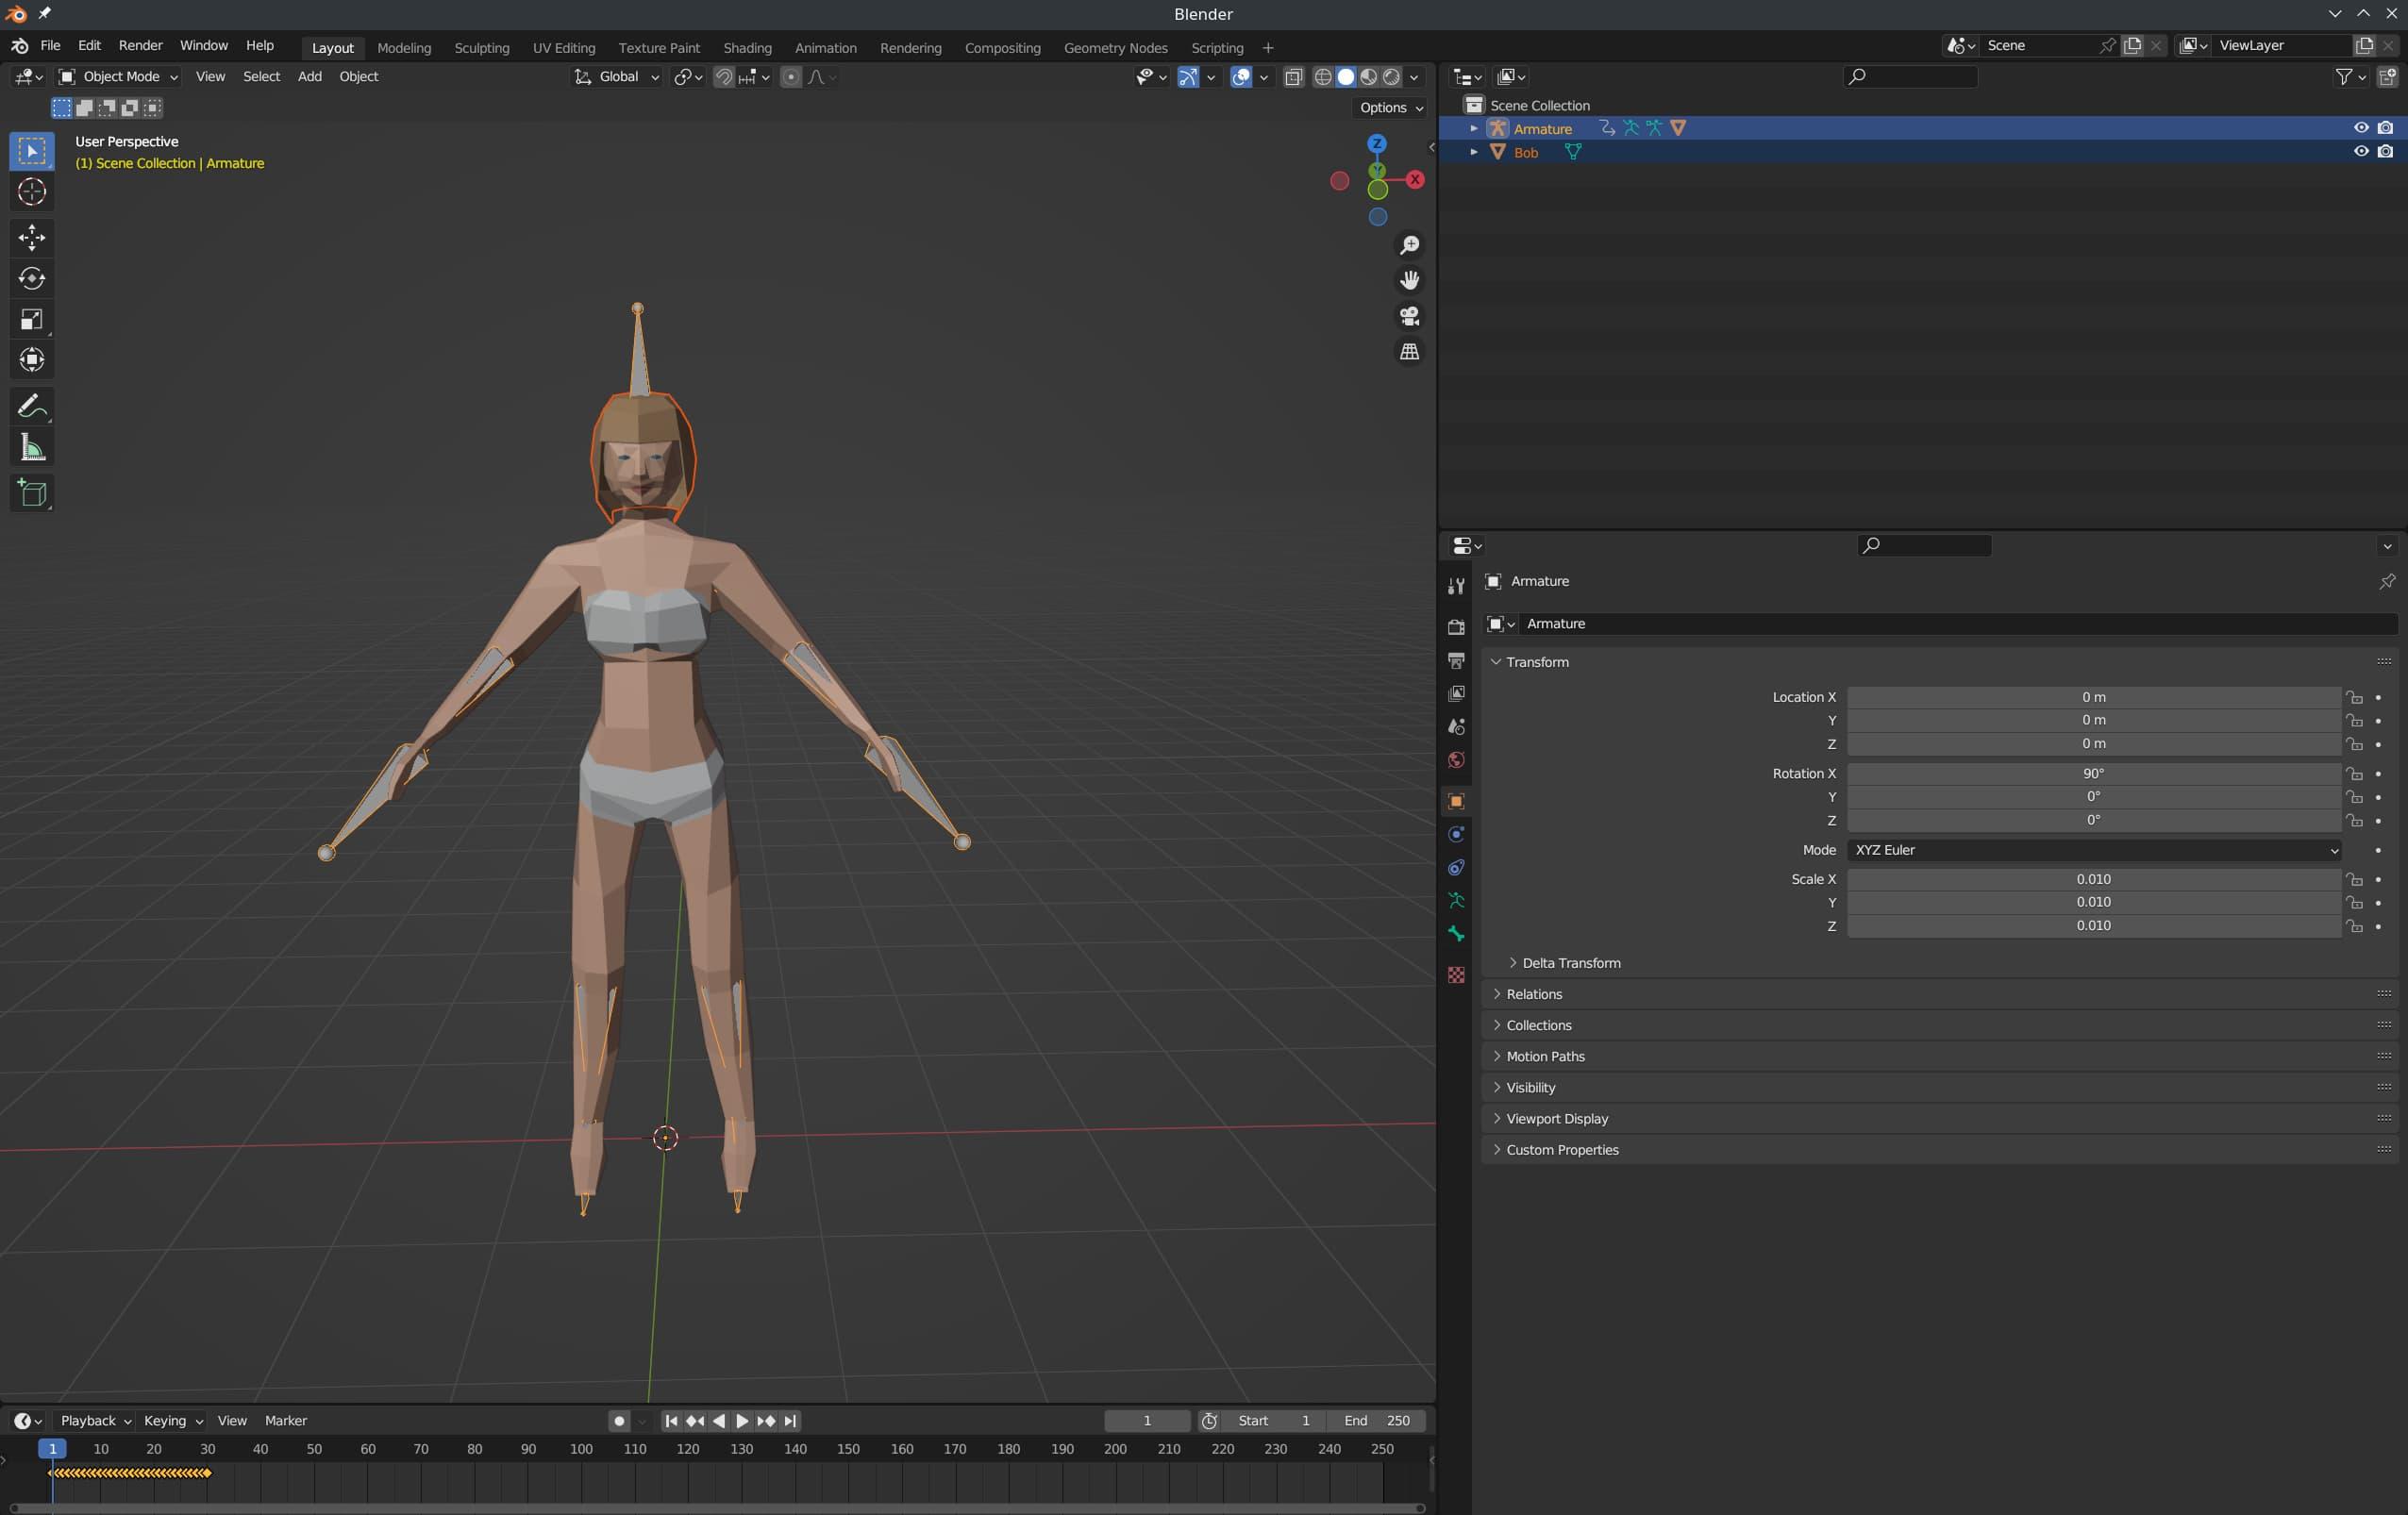 A Blender screenshot, showing the Bob hair object highlighted in red, and the bones of the armature highlighted in yellow